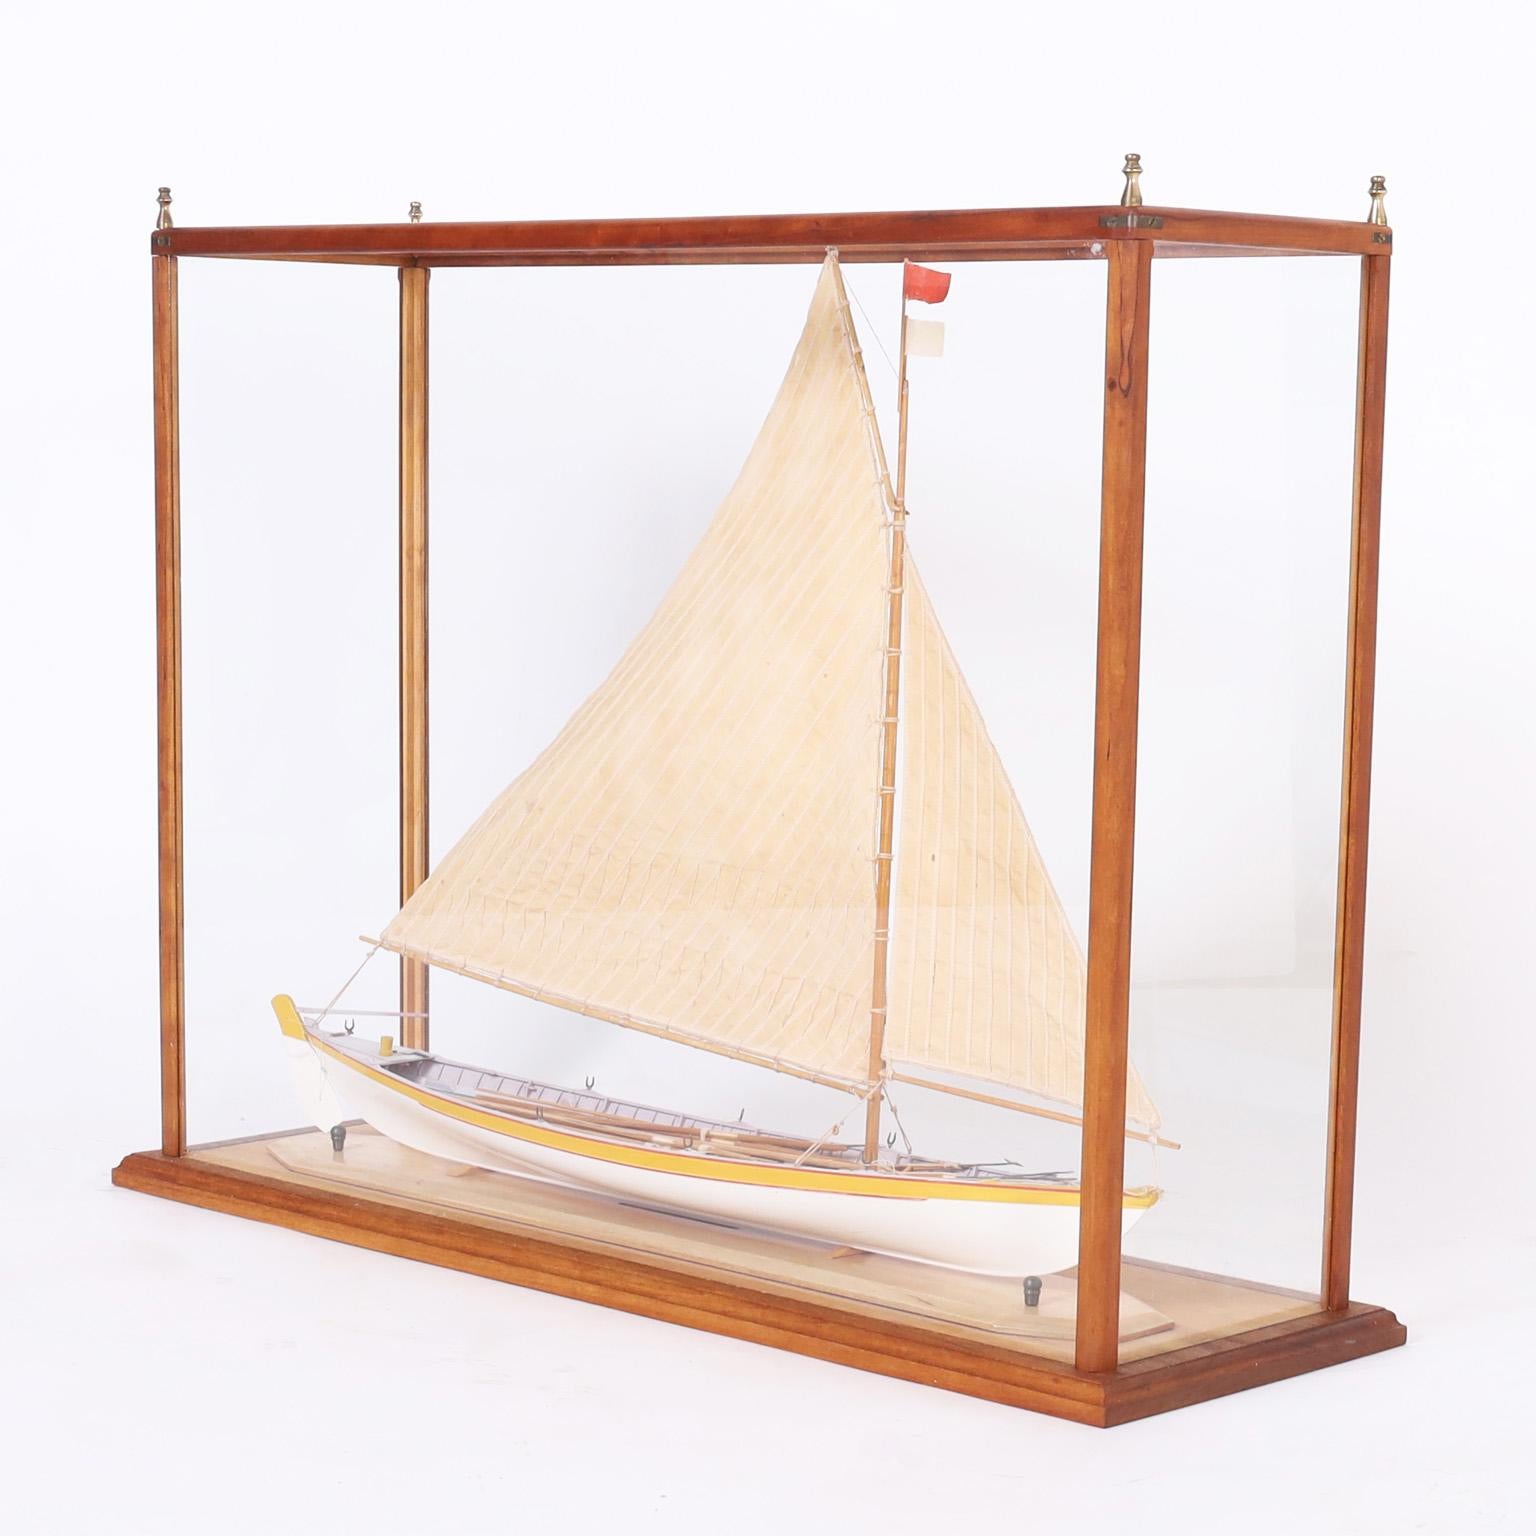 Impressive handmade whaling longboat model with canvas sails and a realistic painted wood hull complete with oars and harpoons. Presented in a custom mahogany and glass case with brass finials.